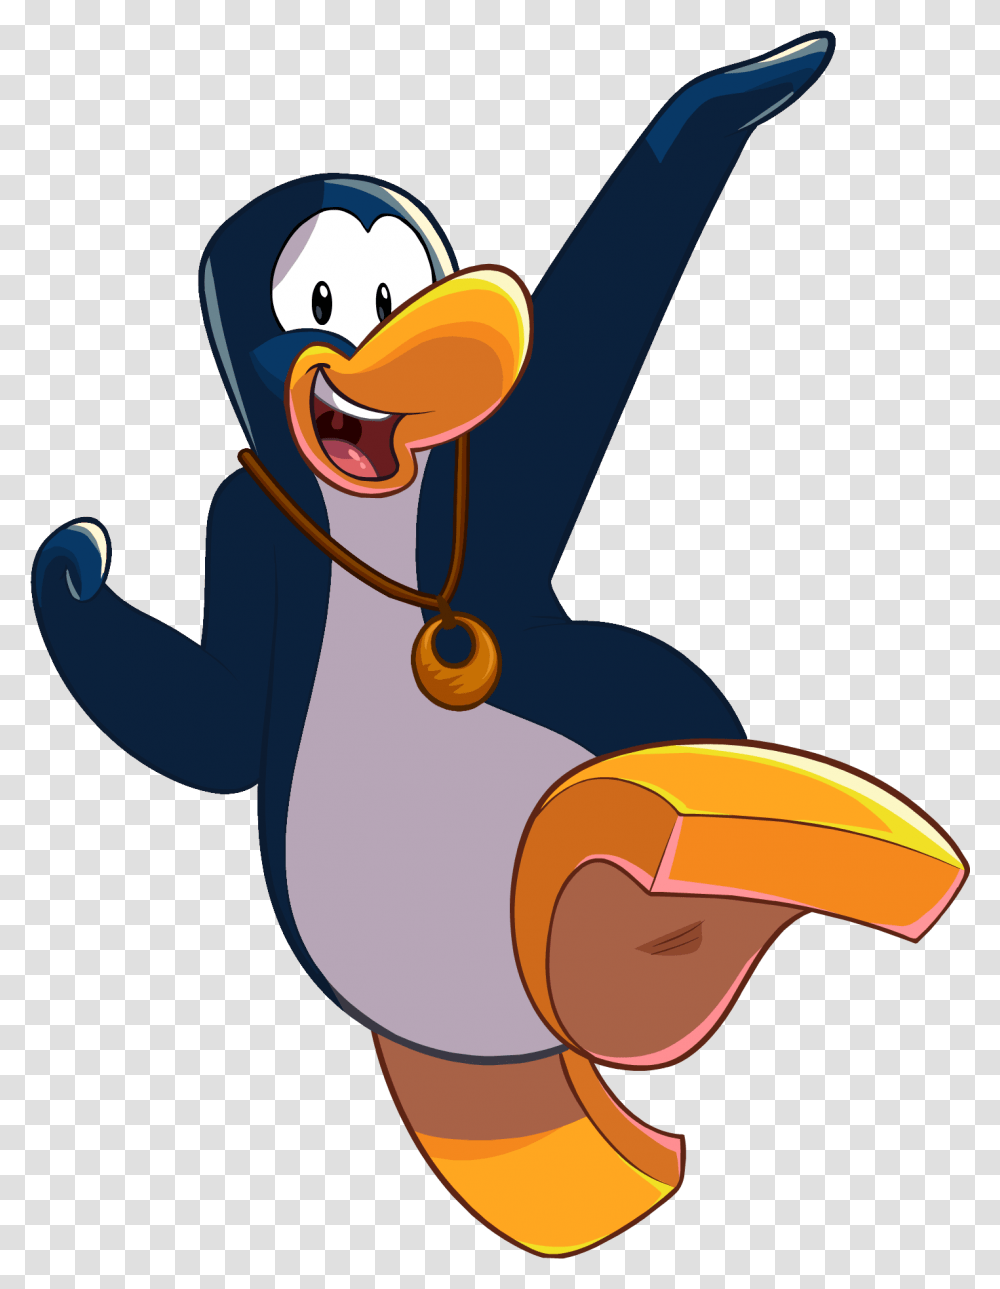 Jumping Penguin With Pendant Necklace Club Penguin Penguin Jumping, Animal, Bird Transparent Png